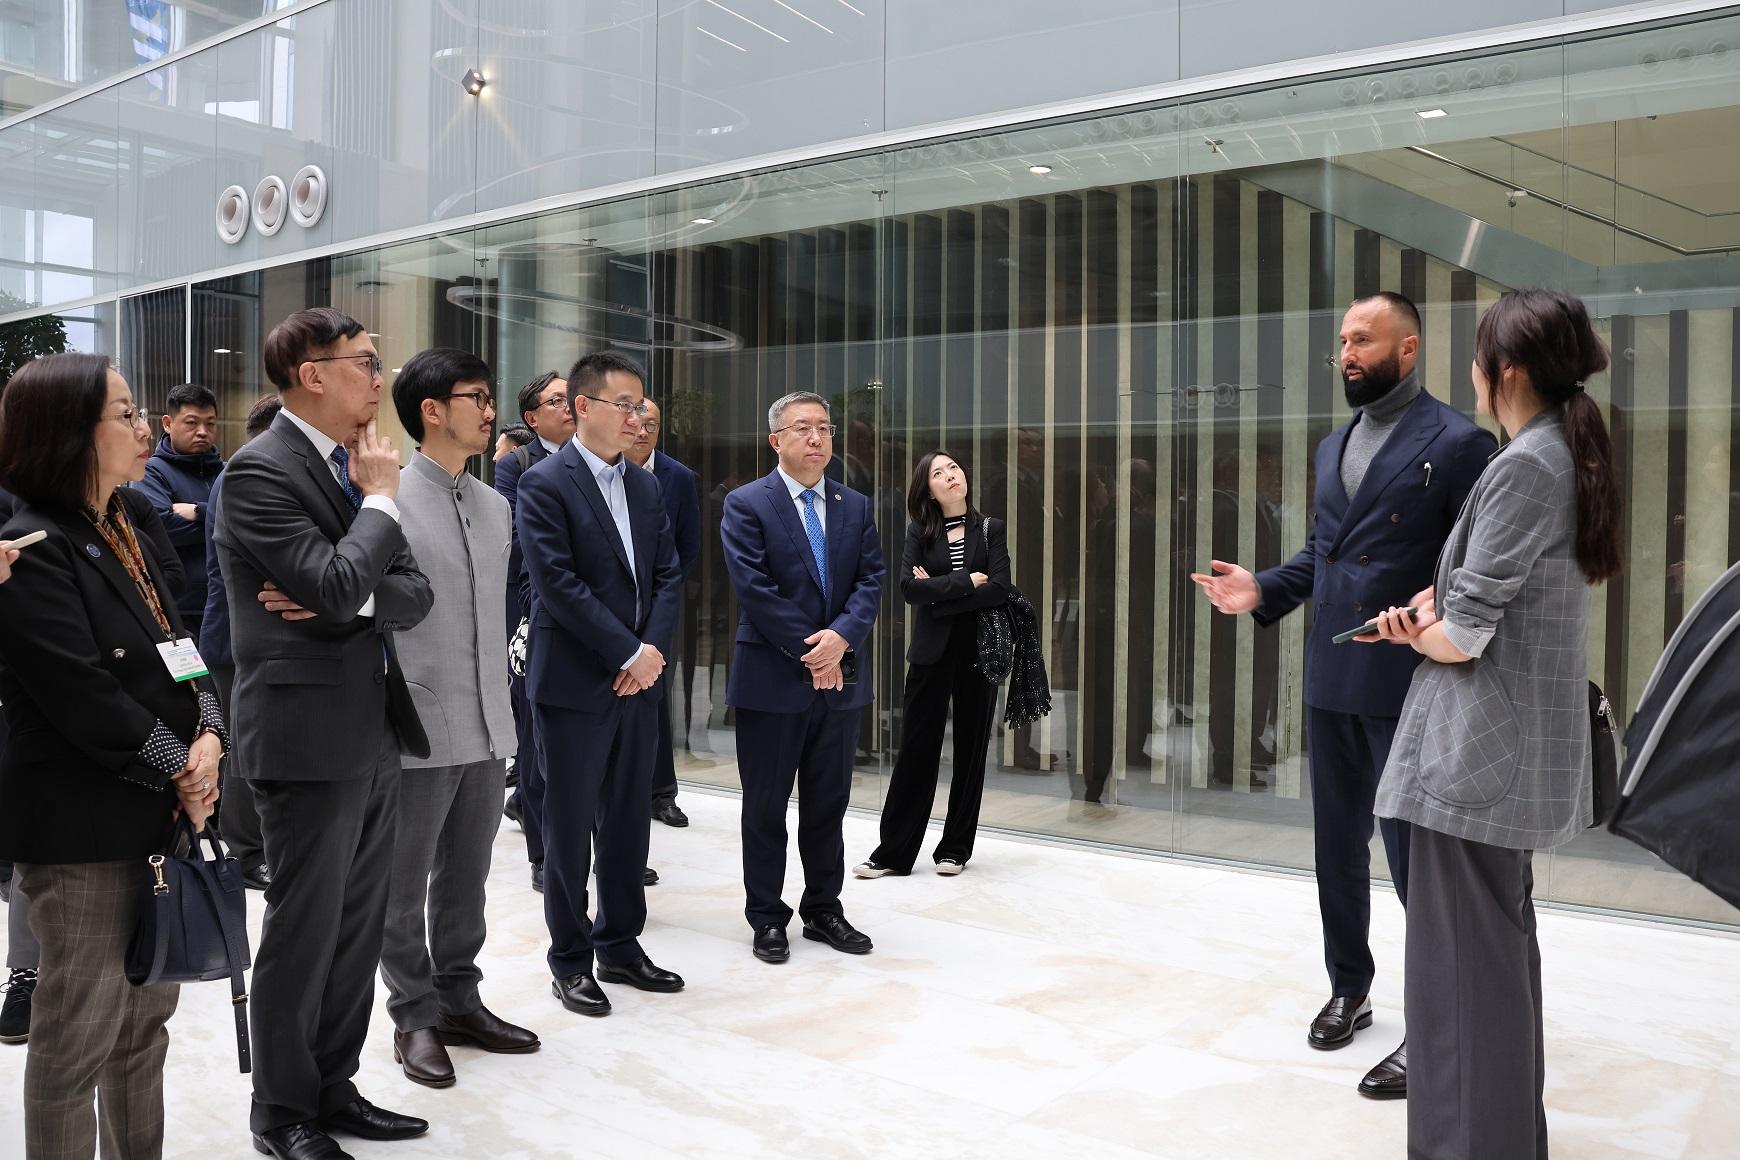 The Mainland-Hong Kong joint business mission visited Hungary and Kazakhstan from May 16 to 22. Photo shows the mission visiting the Astana International Financial Centre in Kazakhstan on May 20.